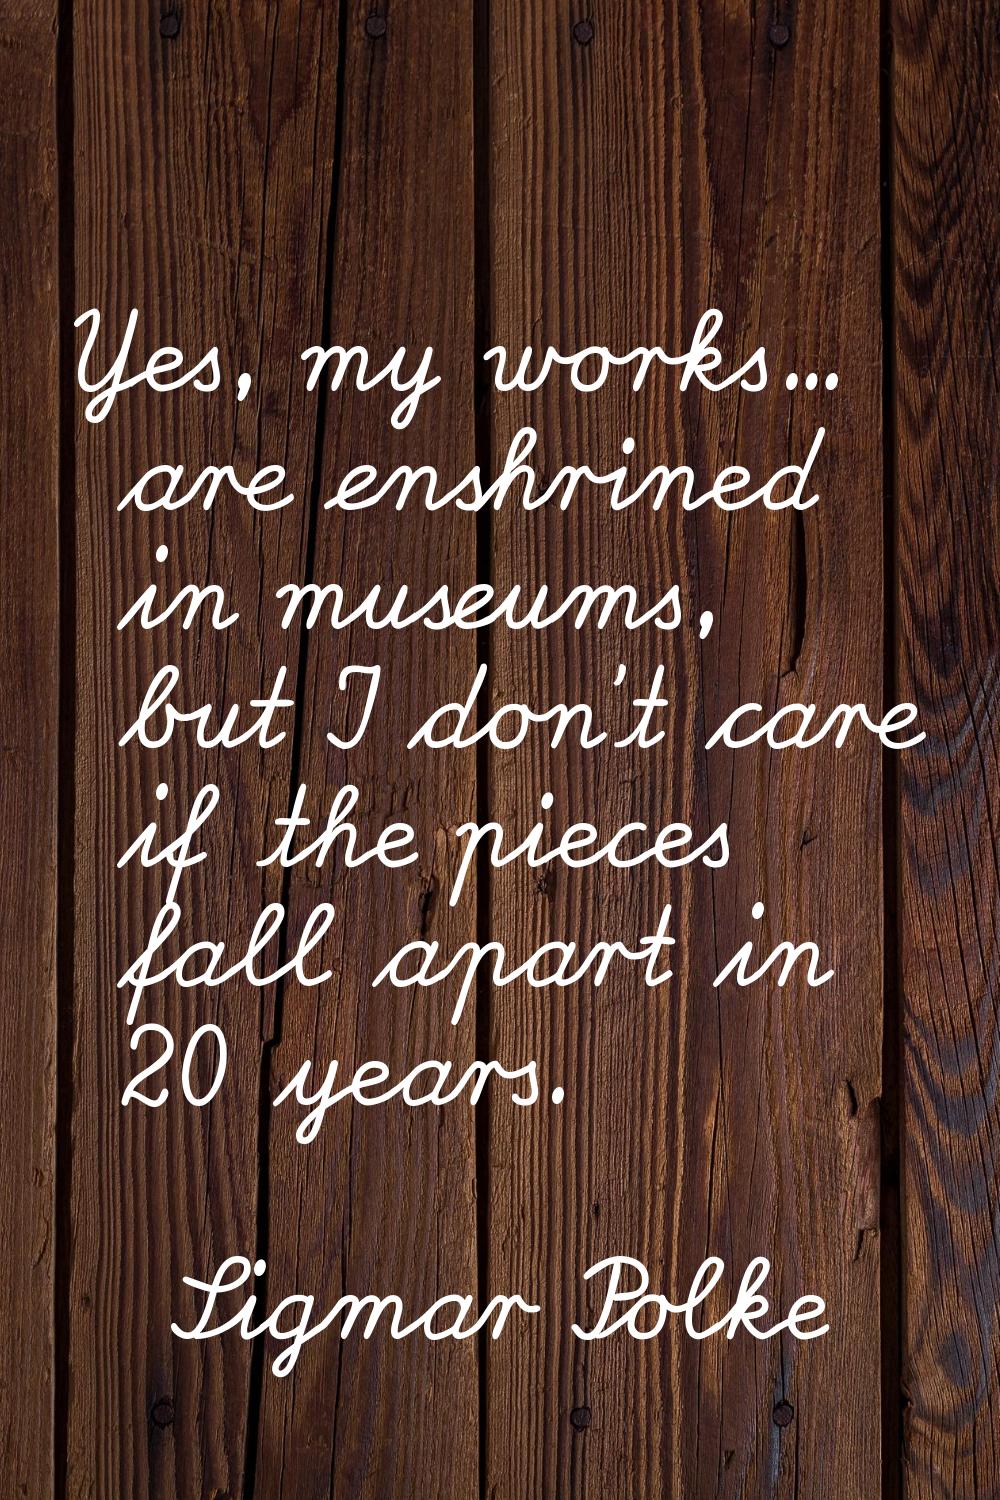 Yes, my works... are enshrined in museums, but I don't care if the pieces fall apart in 20 years.